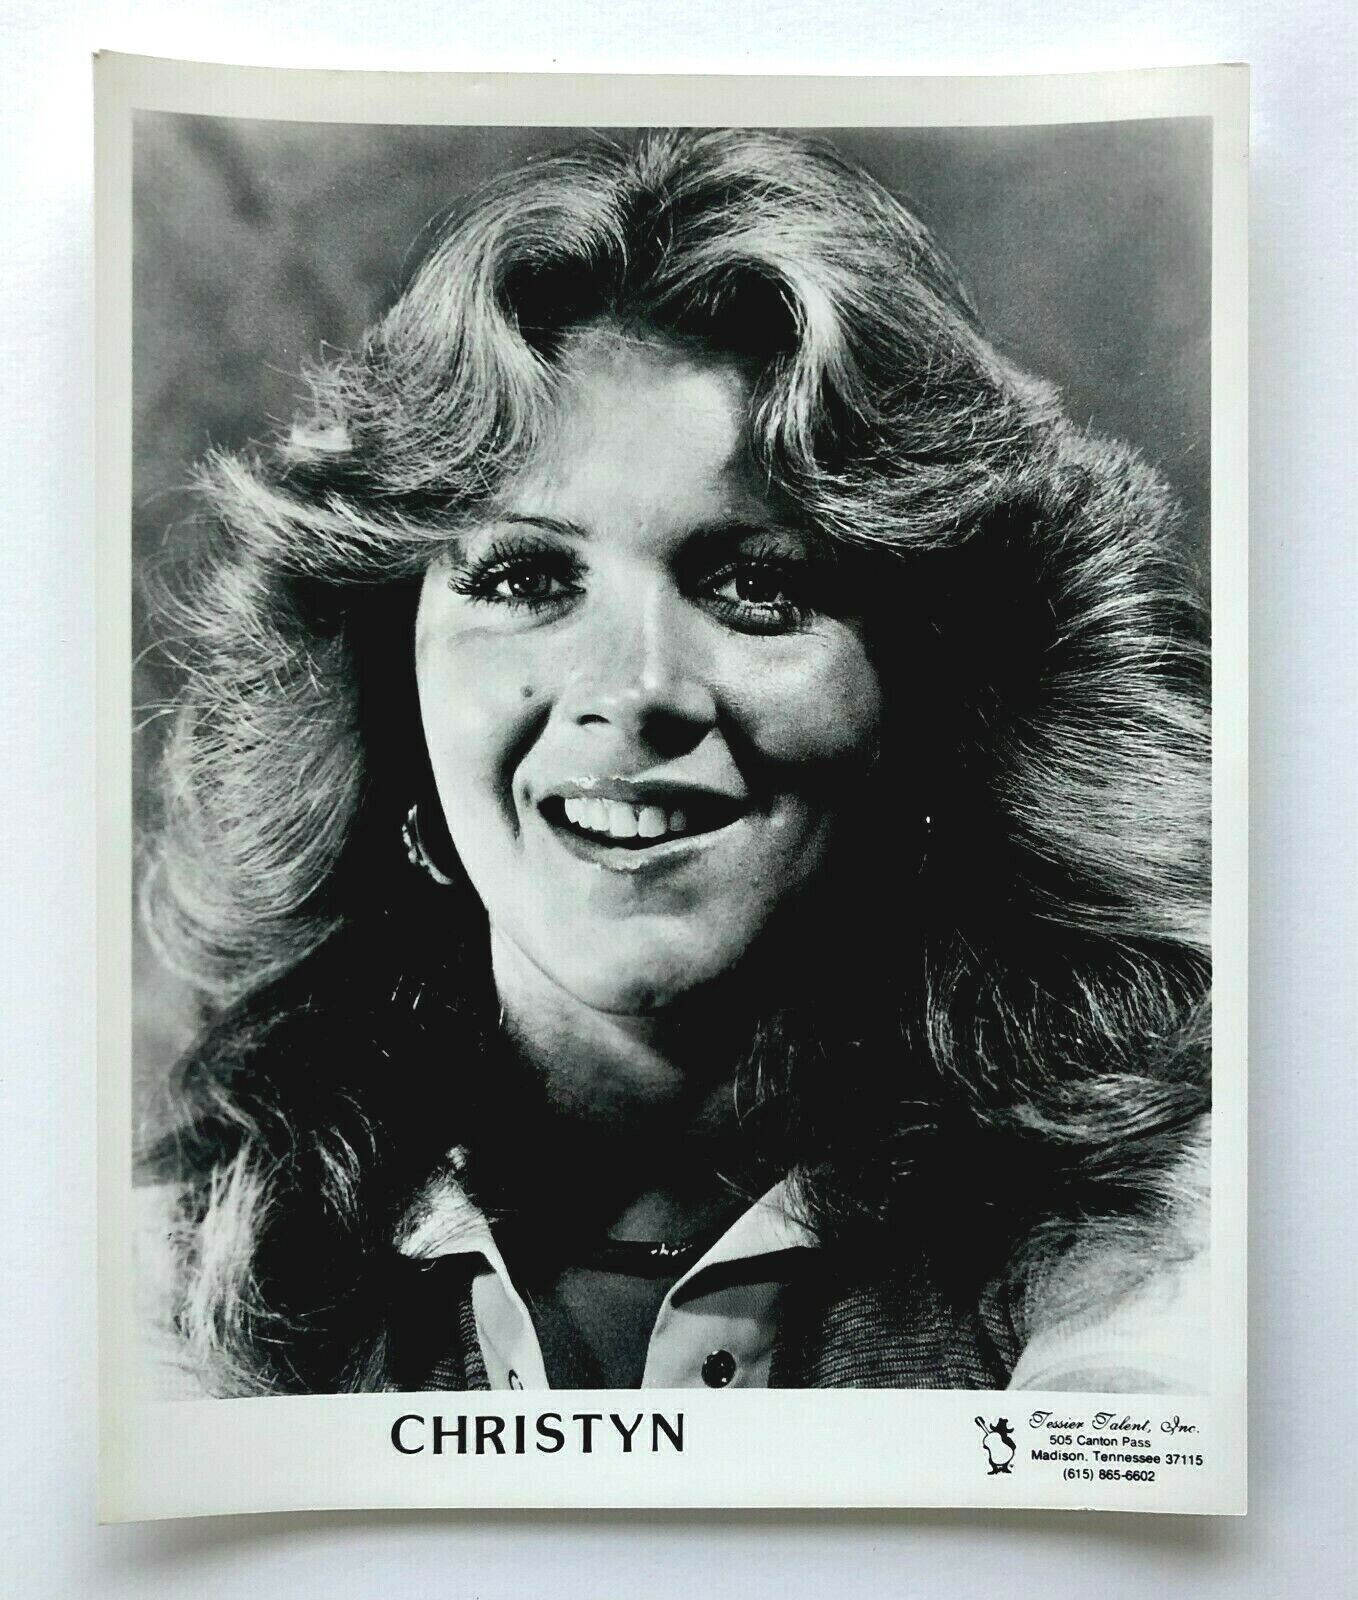 1970s Christyn Press Promo Photo Country Singer Songwriter Retro Musician